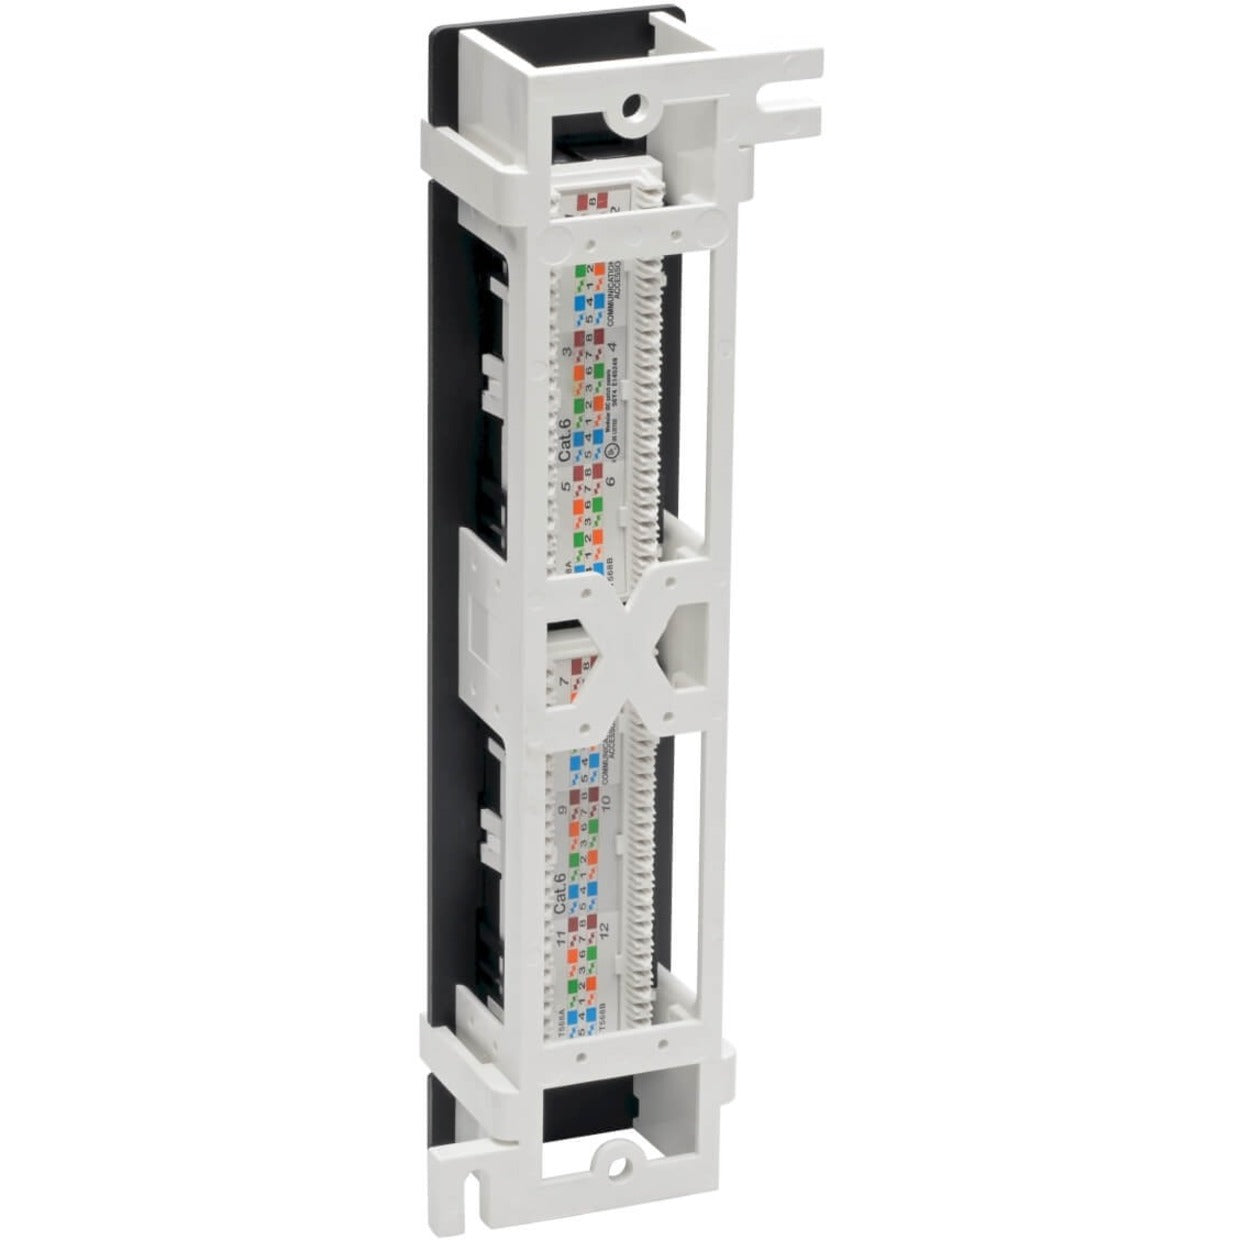 Tripp Lite N250-P12 12-Port Wall-Mount Cat6 Patch Panel - PoE+ Compliant, Easy Network Cable Management